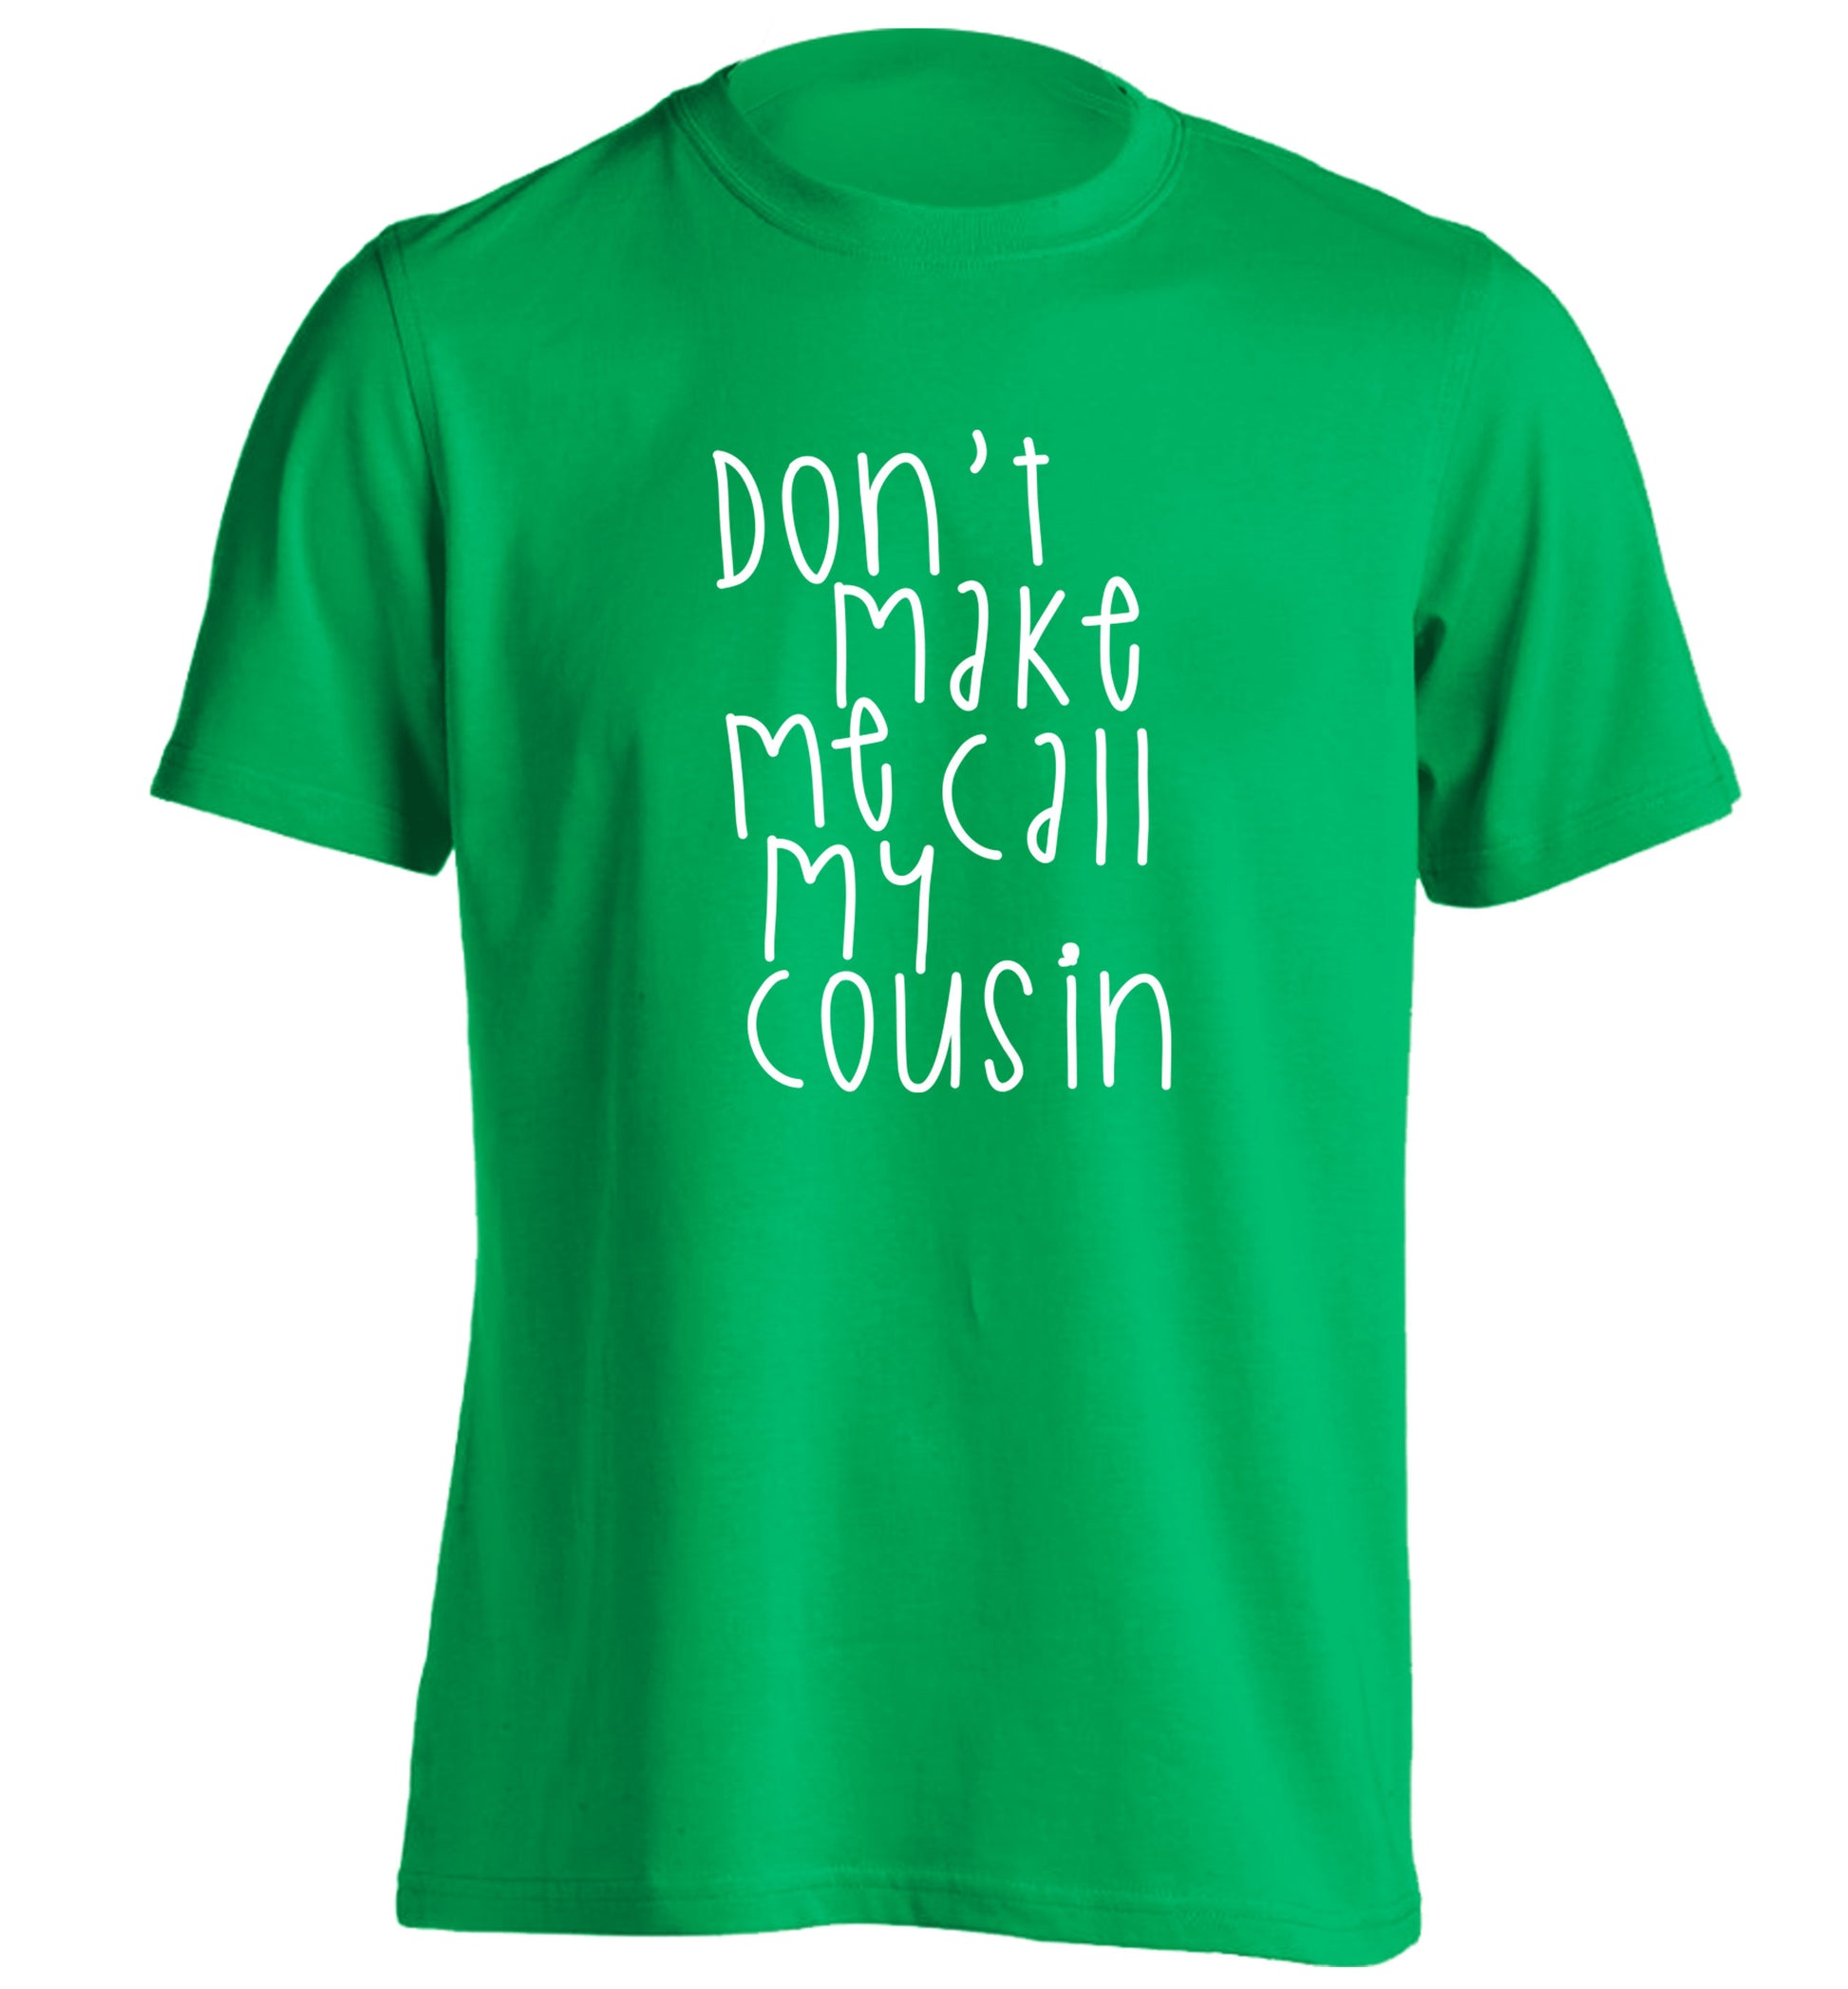 Don't make me call my cousin adults unisex green Tshirt 2XL